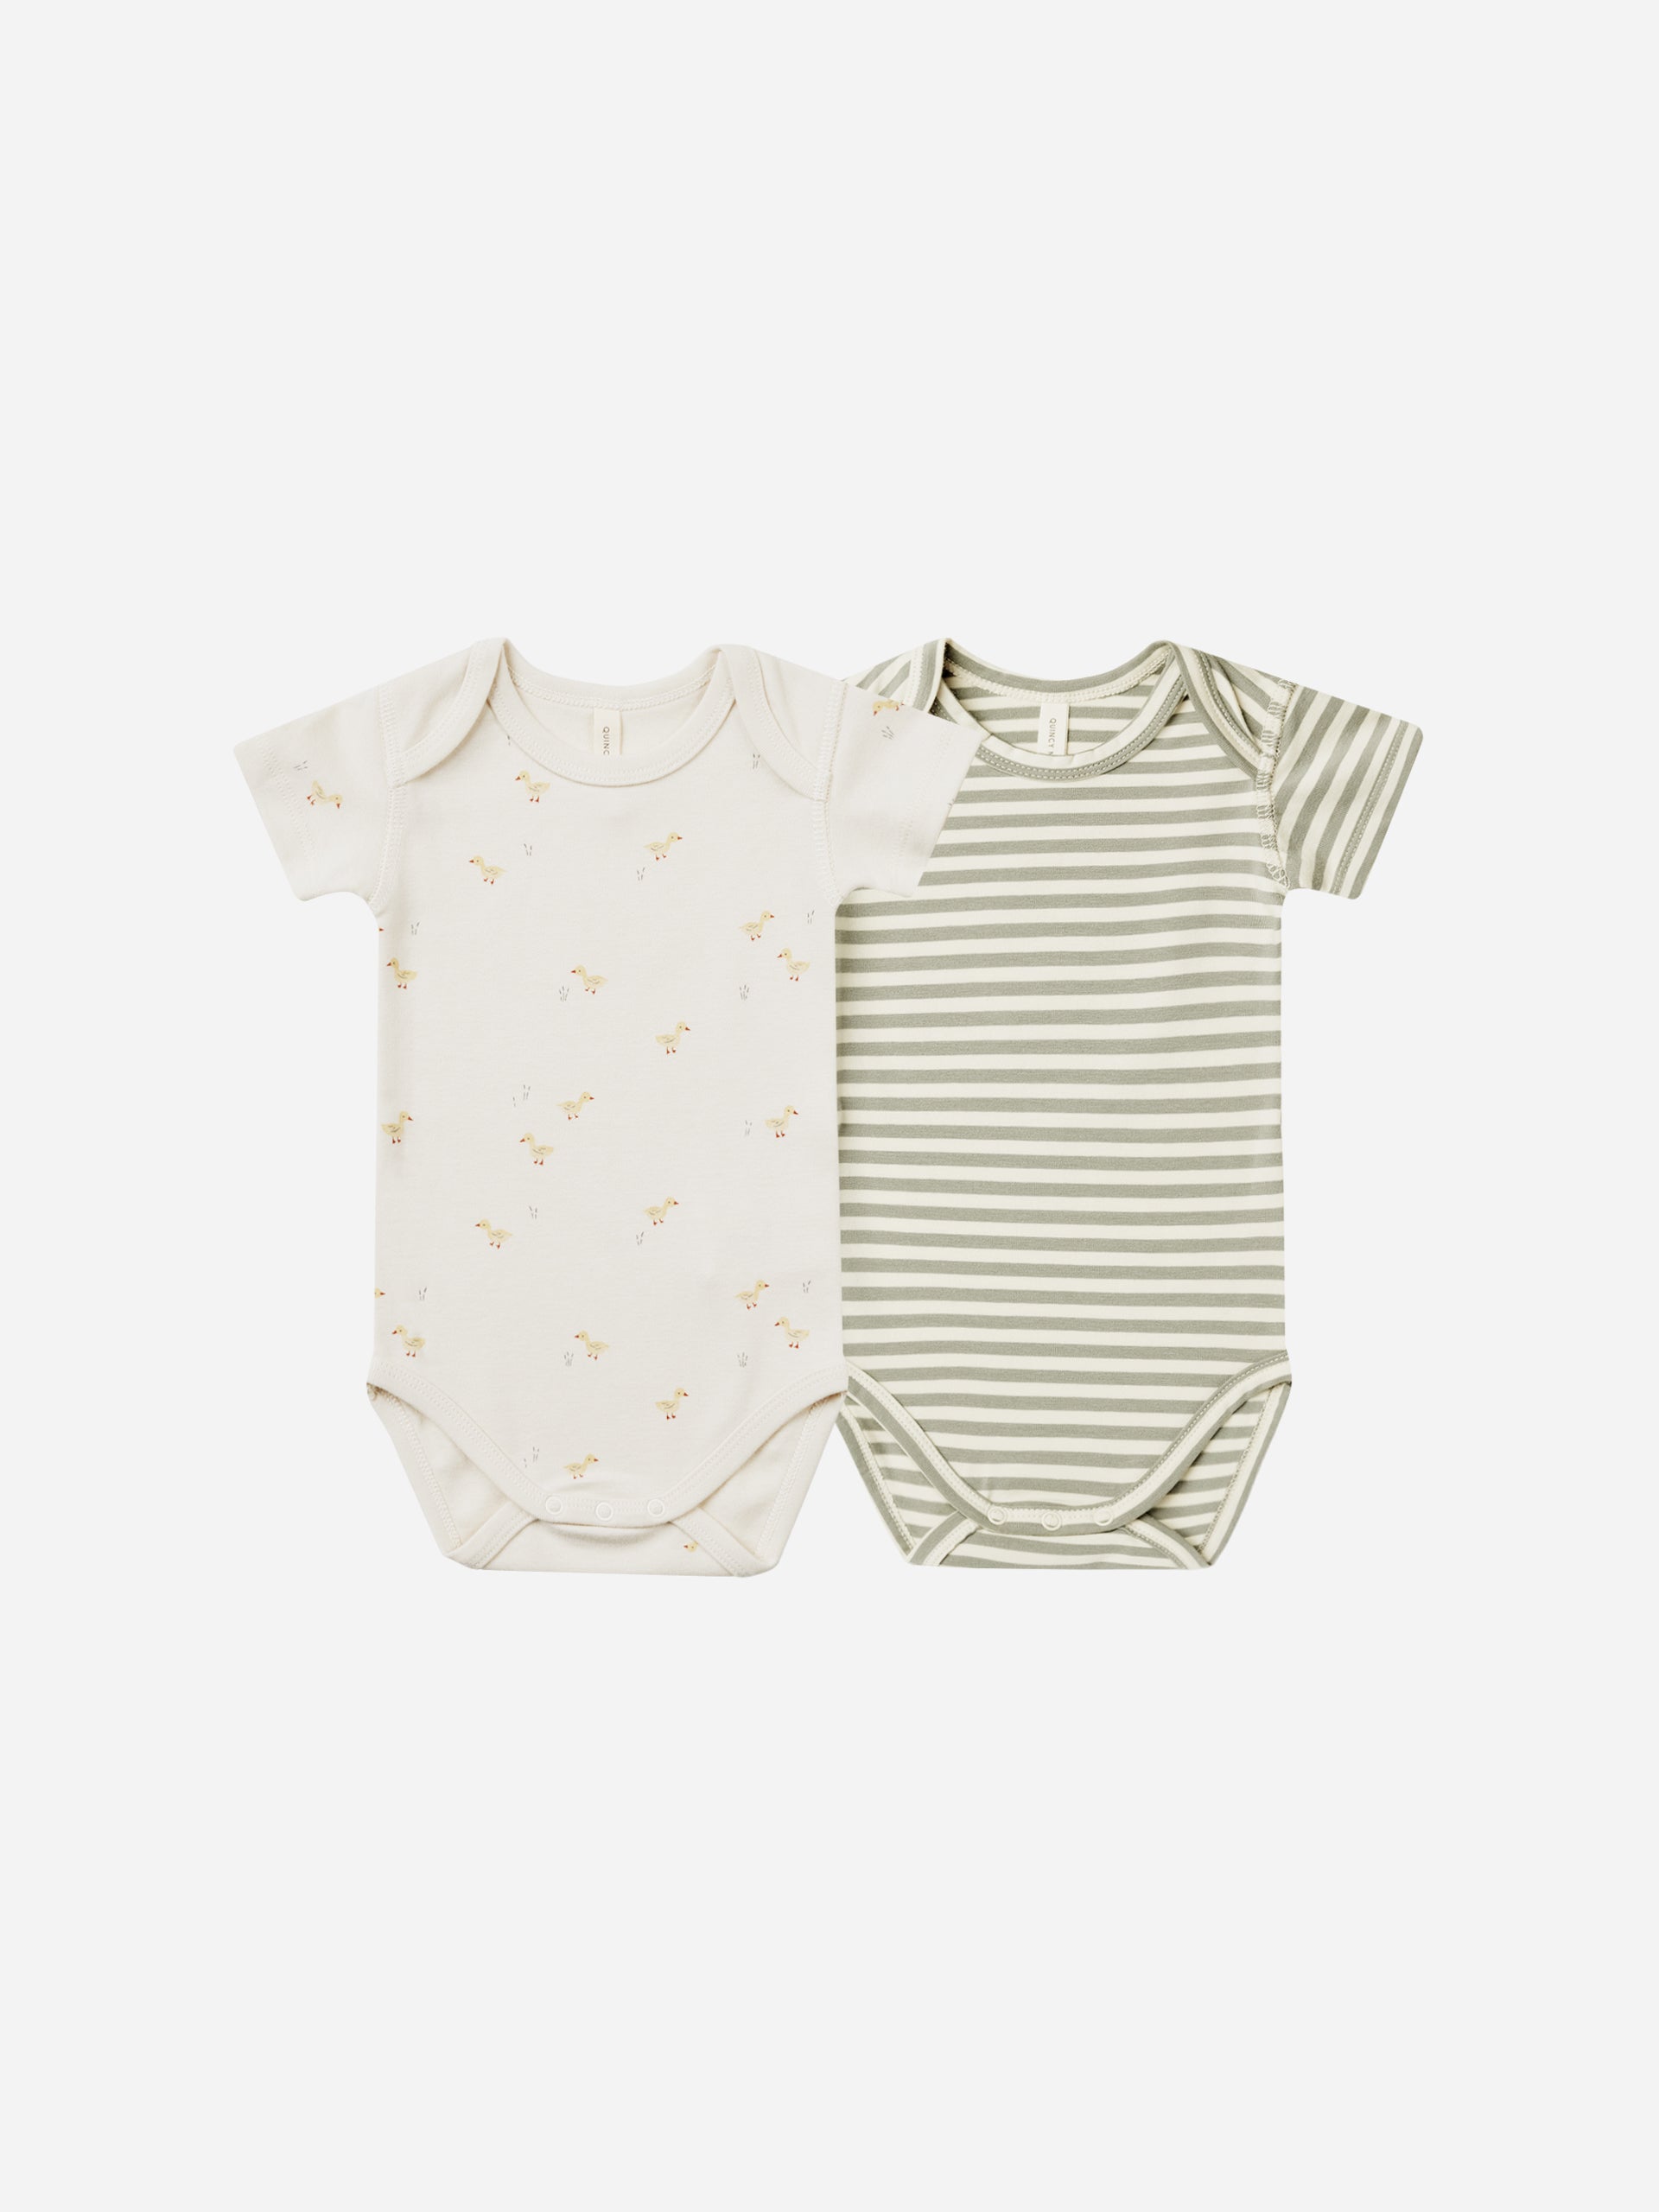 Short Sleeve Bodysuit, 2 Pack || Ducks, Sage Stripe - Rylee + Cru | Kids Clothes | Trendy Baby Clothes | Modern Infant Outfits |